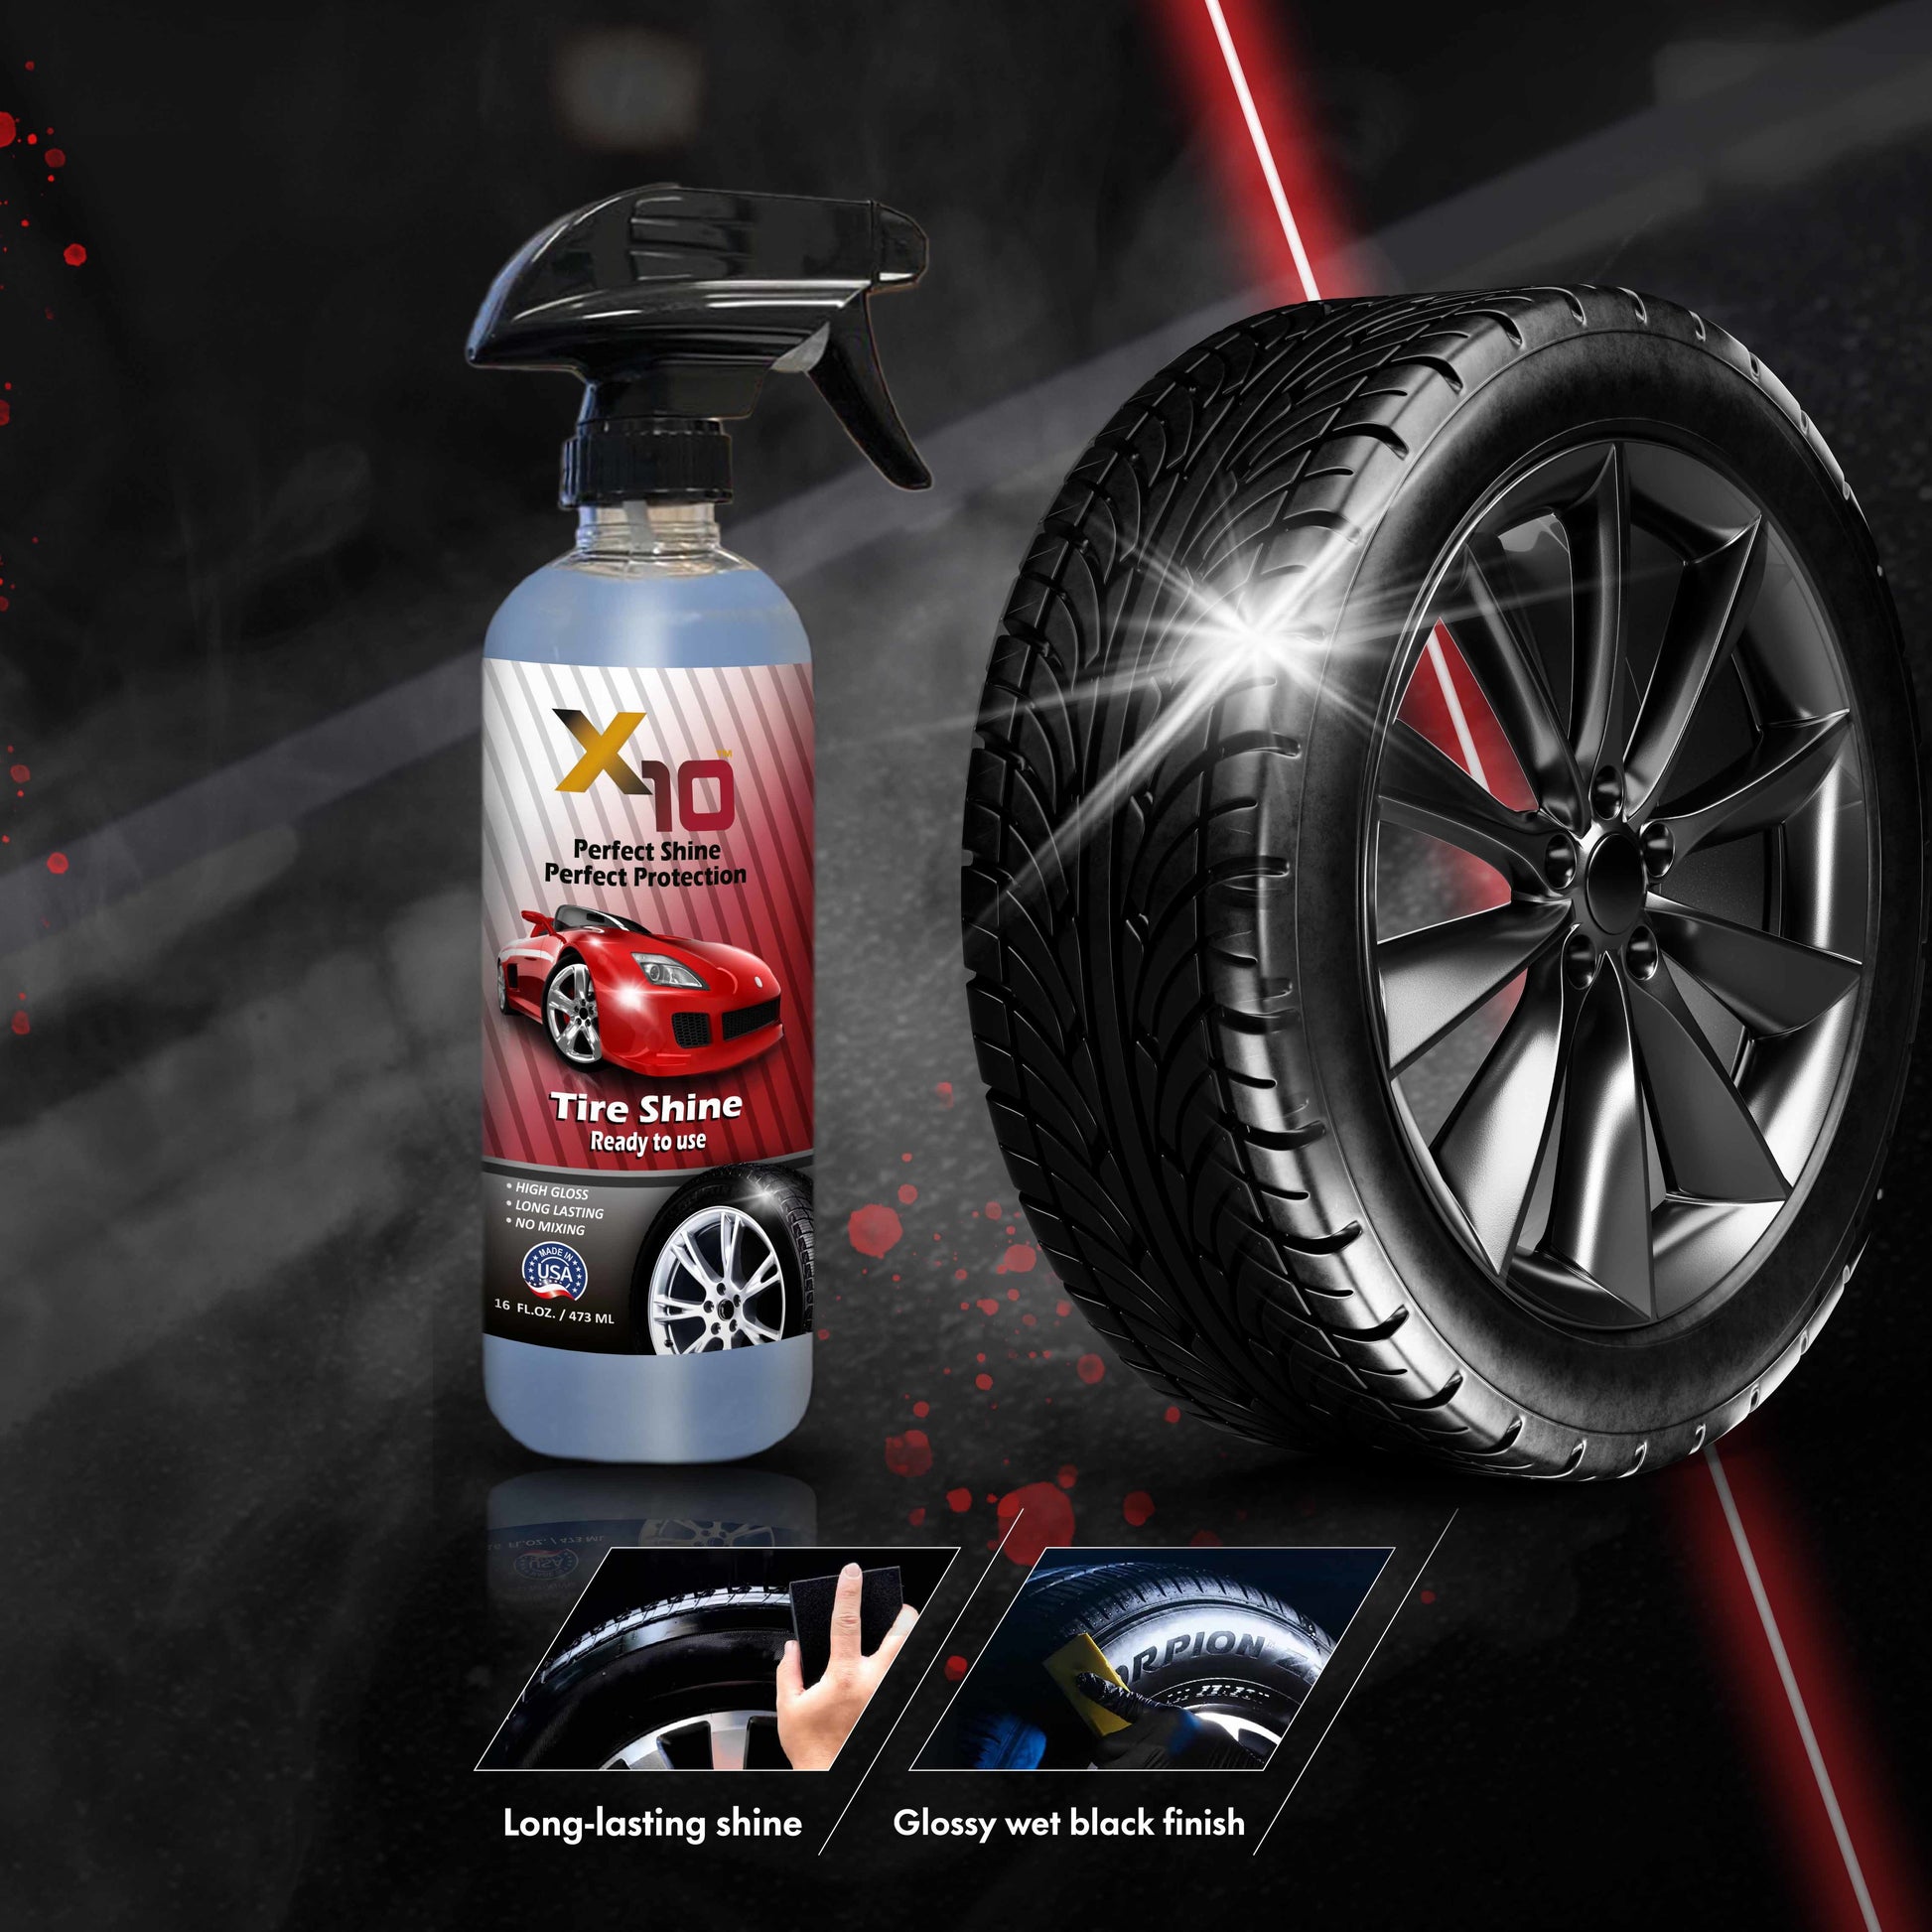 Horizon  High Gloss Water-Based Silicone Free Tire Shine – Greenway's Car  Care Products